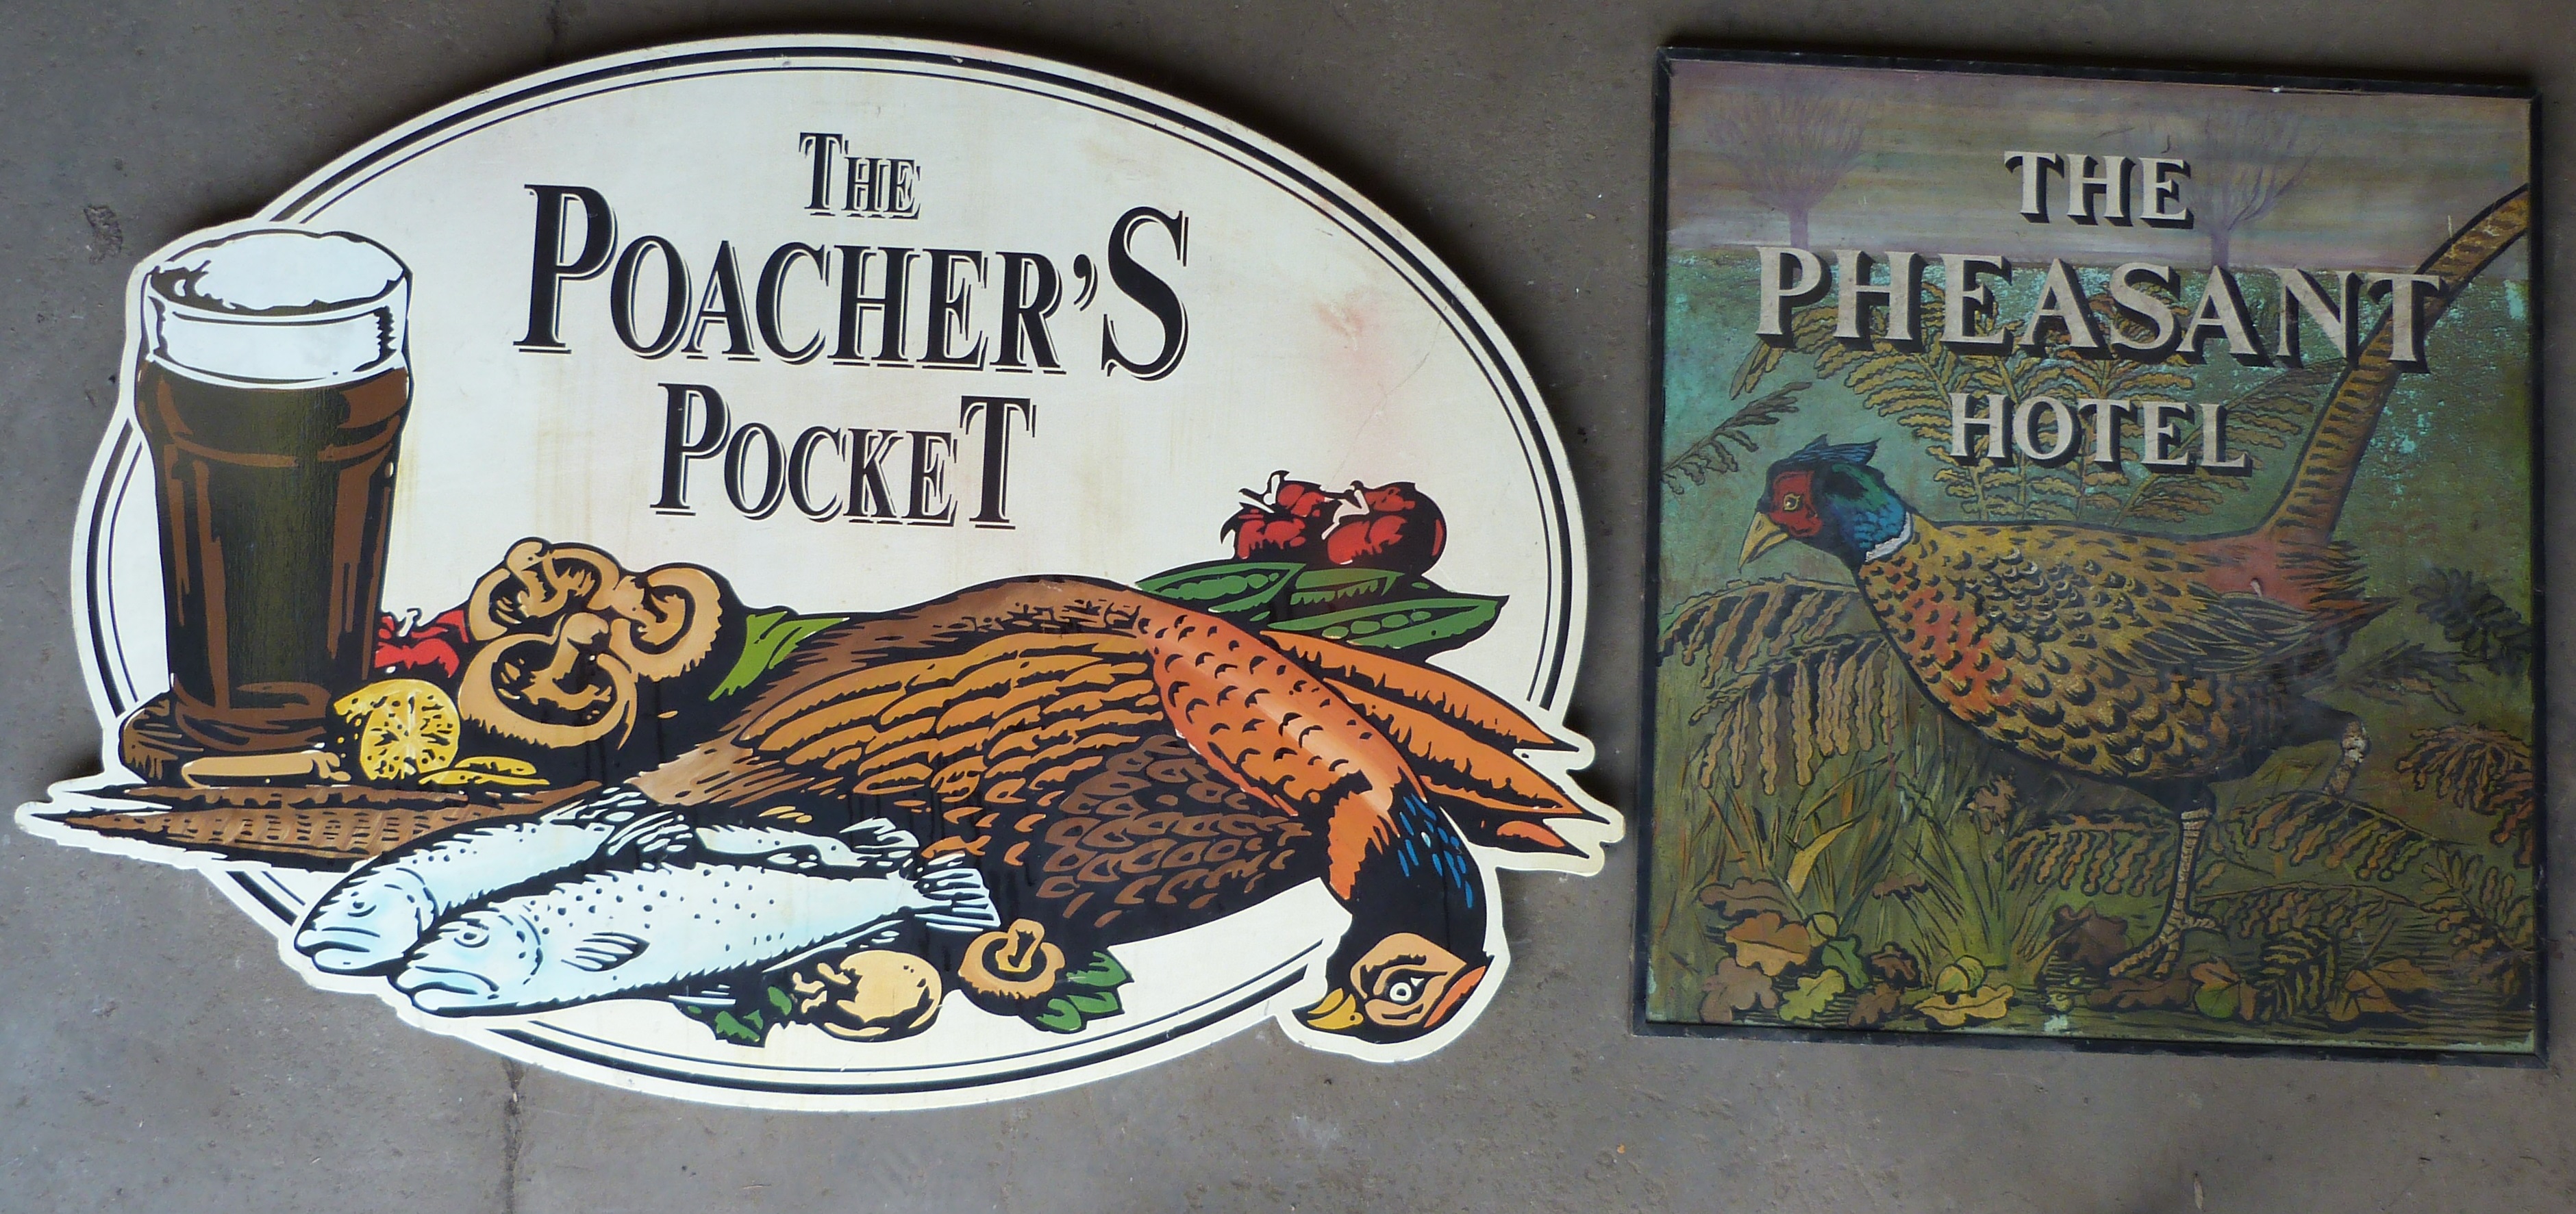 The Pheasant Hotel double sided sign and The Poacher's Pocket sign, largest 152 x 103cm PLEASE